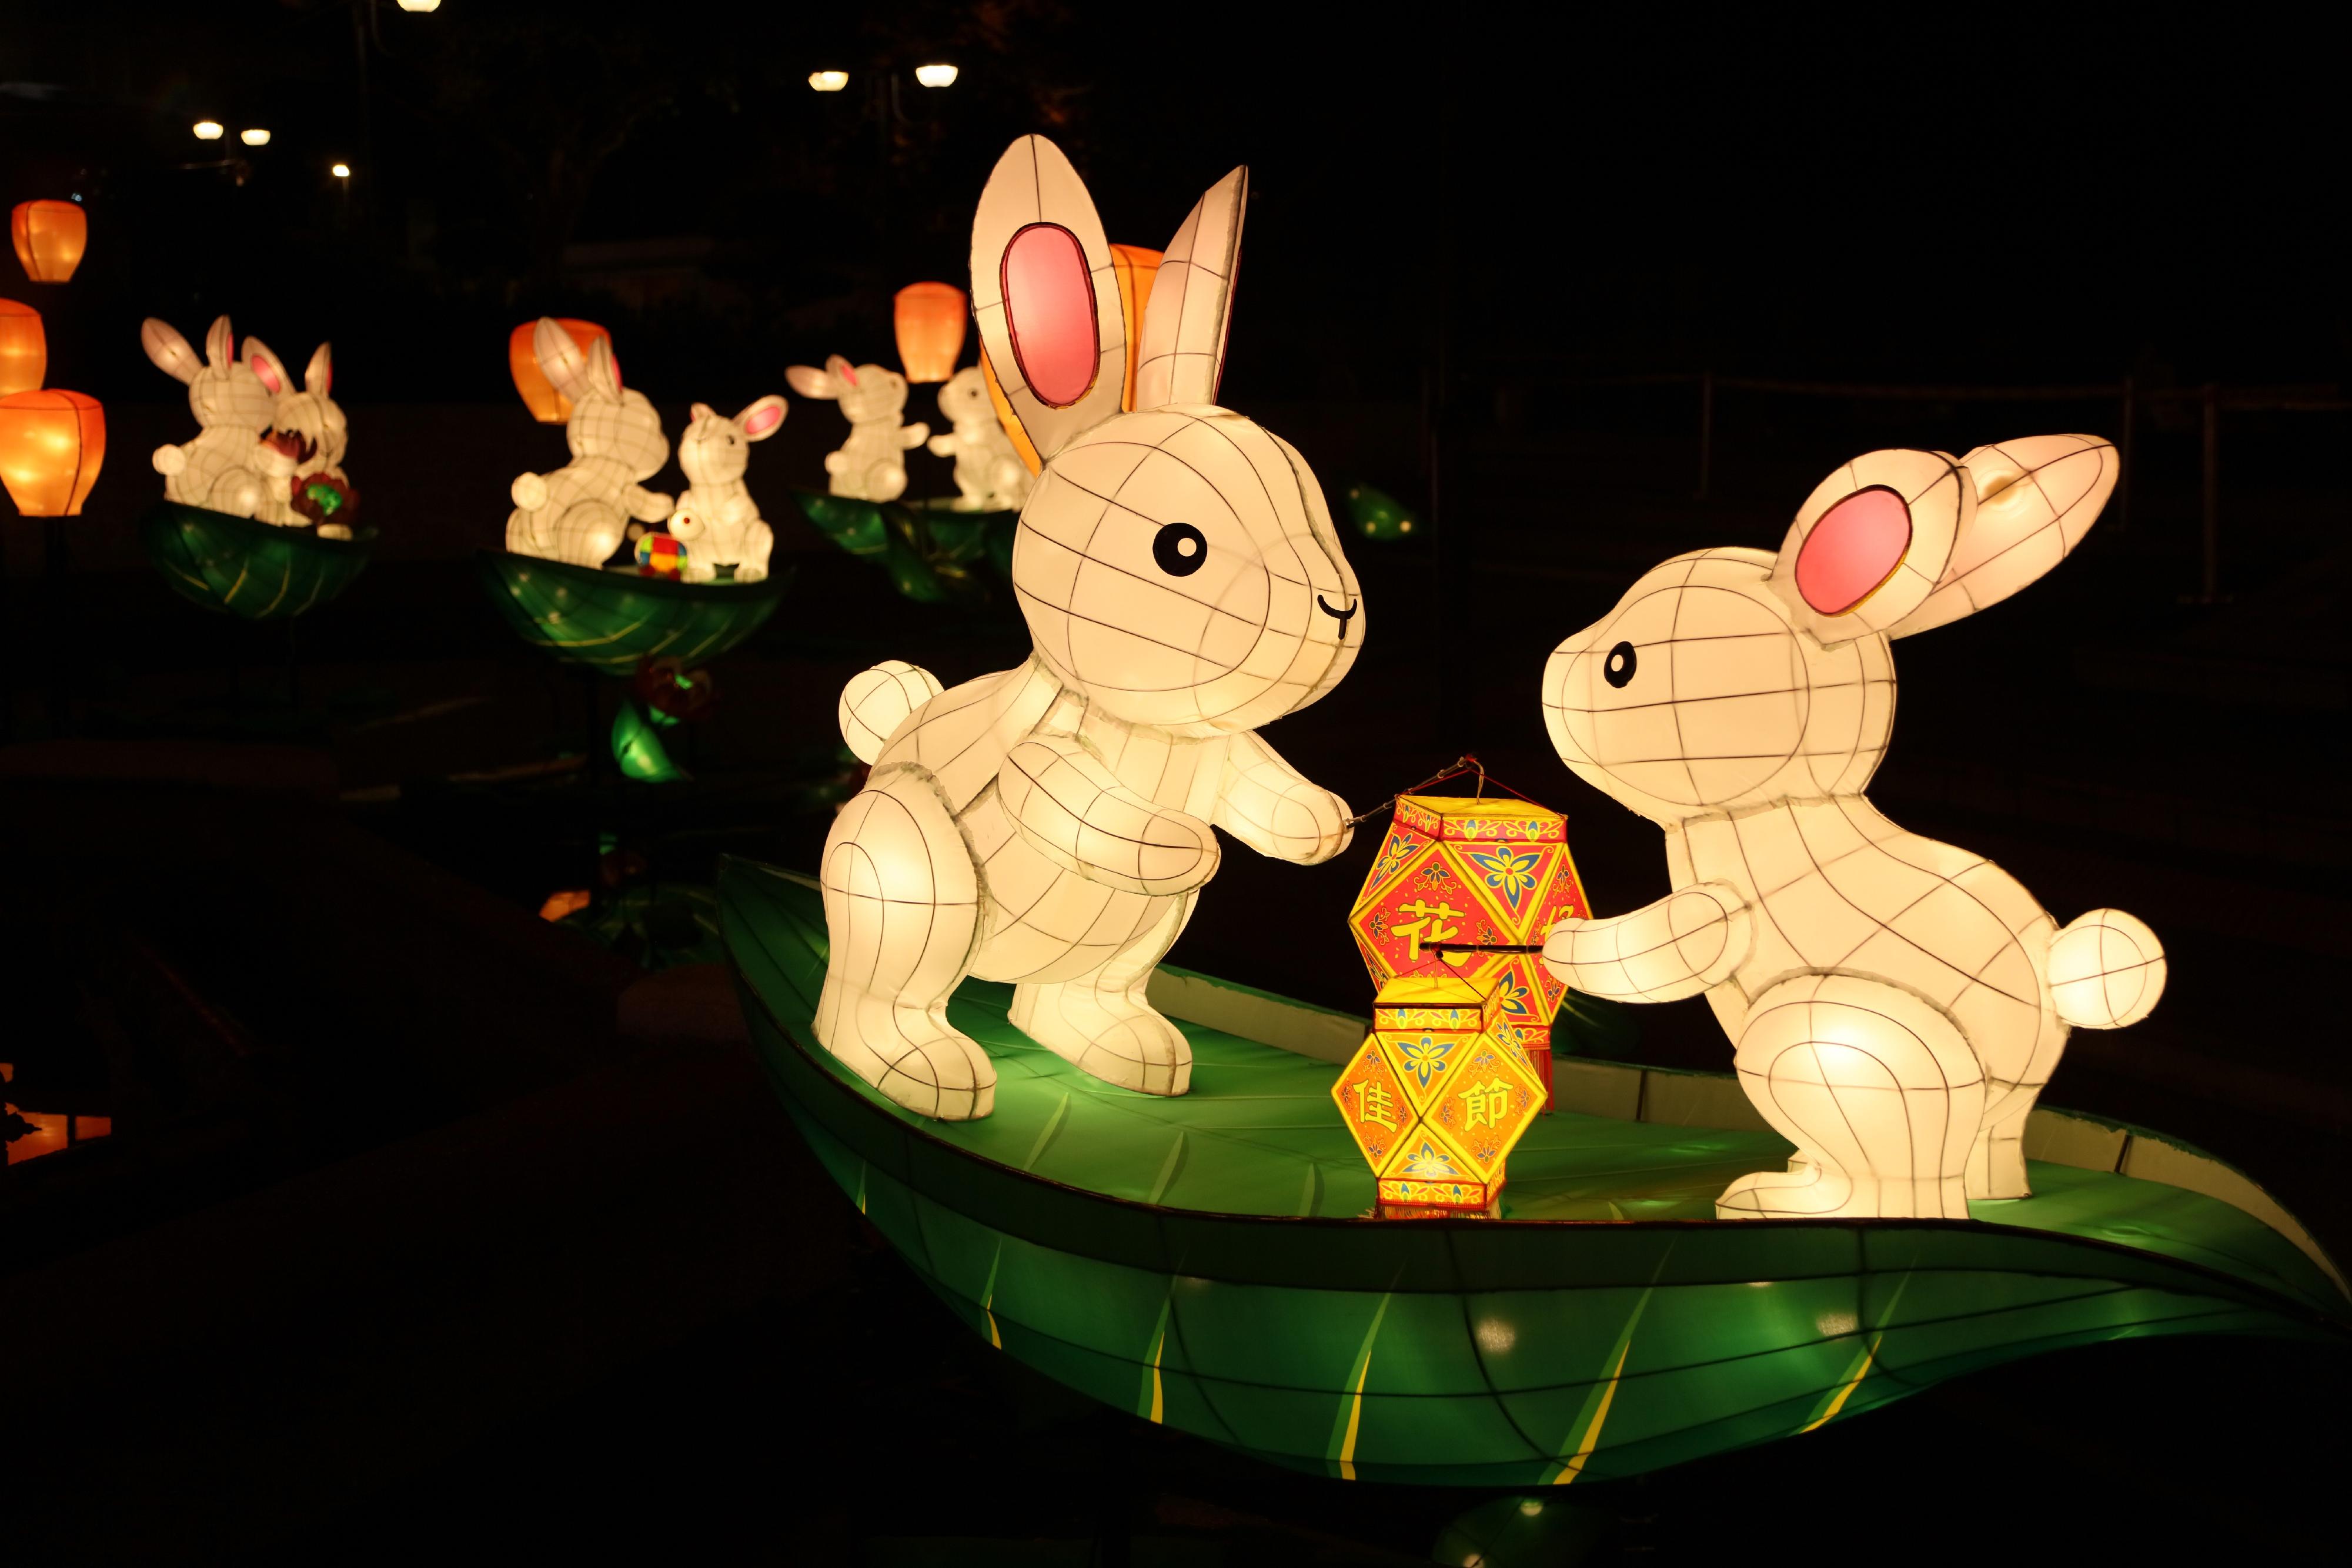 The Leisure and Cultural Services Department will showcase spectacular lantern displays of different themes at the Mid-Autumn Lantern Carnivals in Victoria Park, Sha Tin Park and Tuen Mun Park from tomorrow (September 23) until October 2. A vast range of activities will also be organised in the three parks at different dates. Photo shows jade rabbit lanterns at Sha Tin Park.